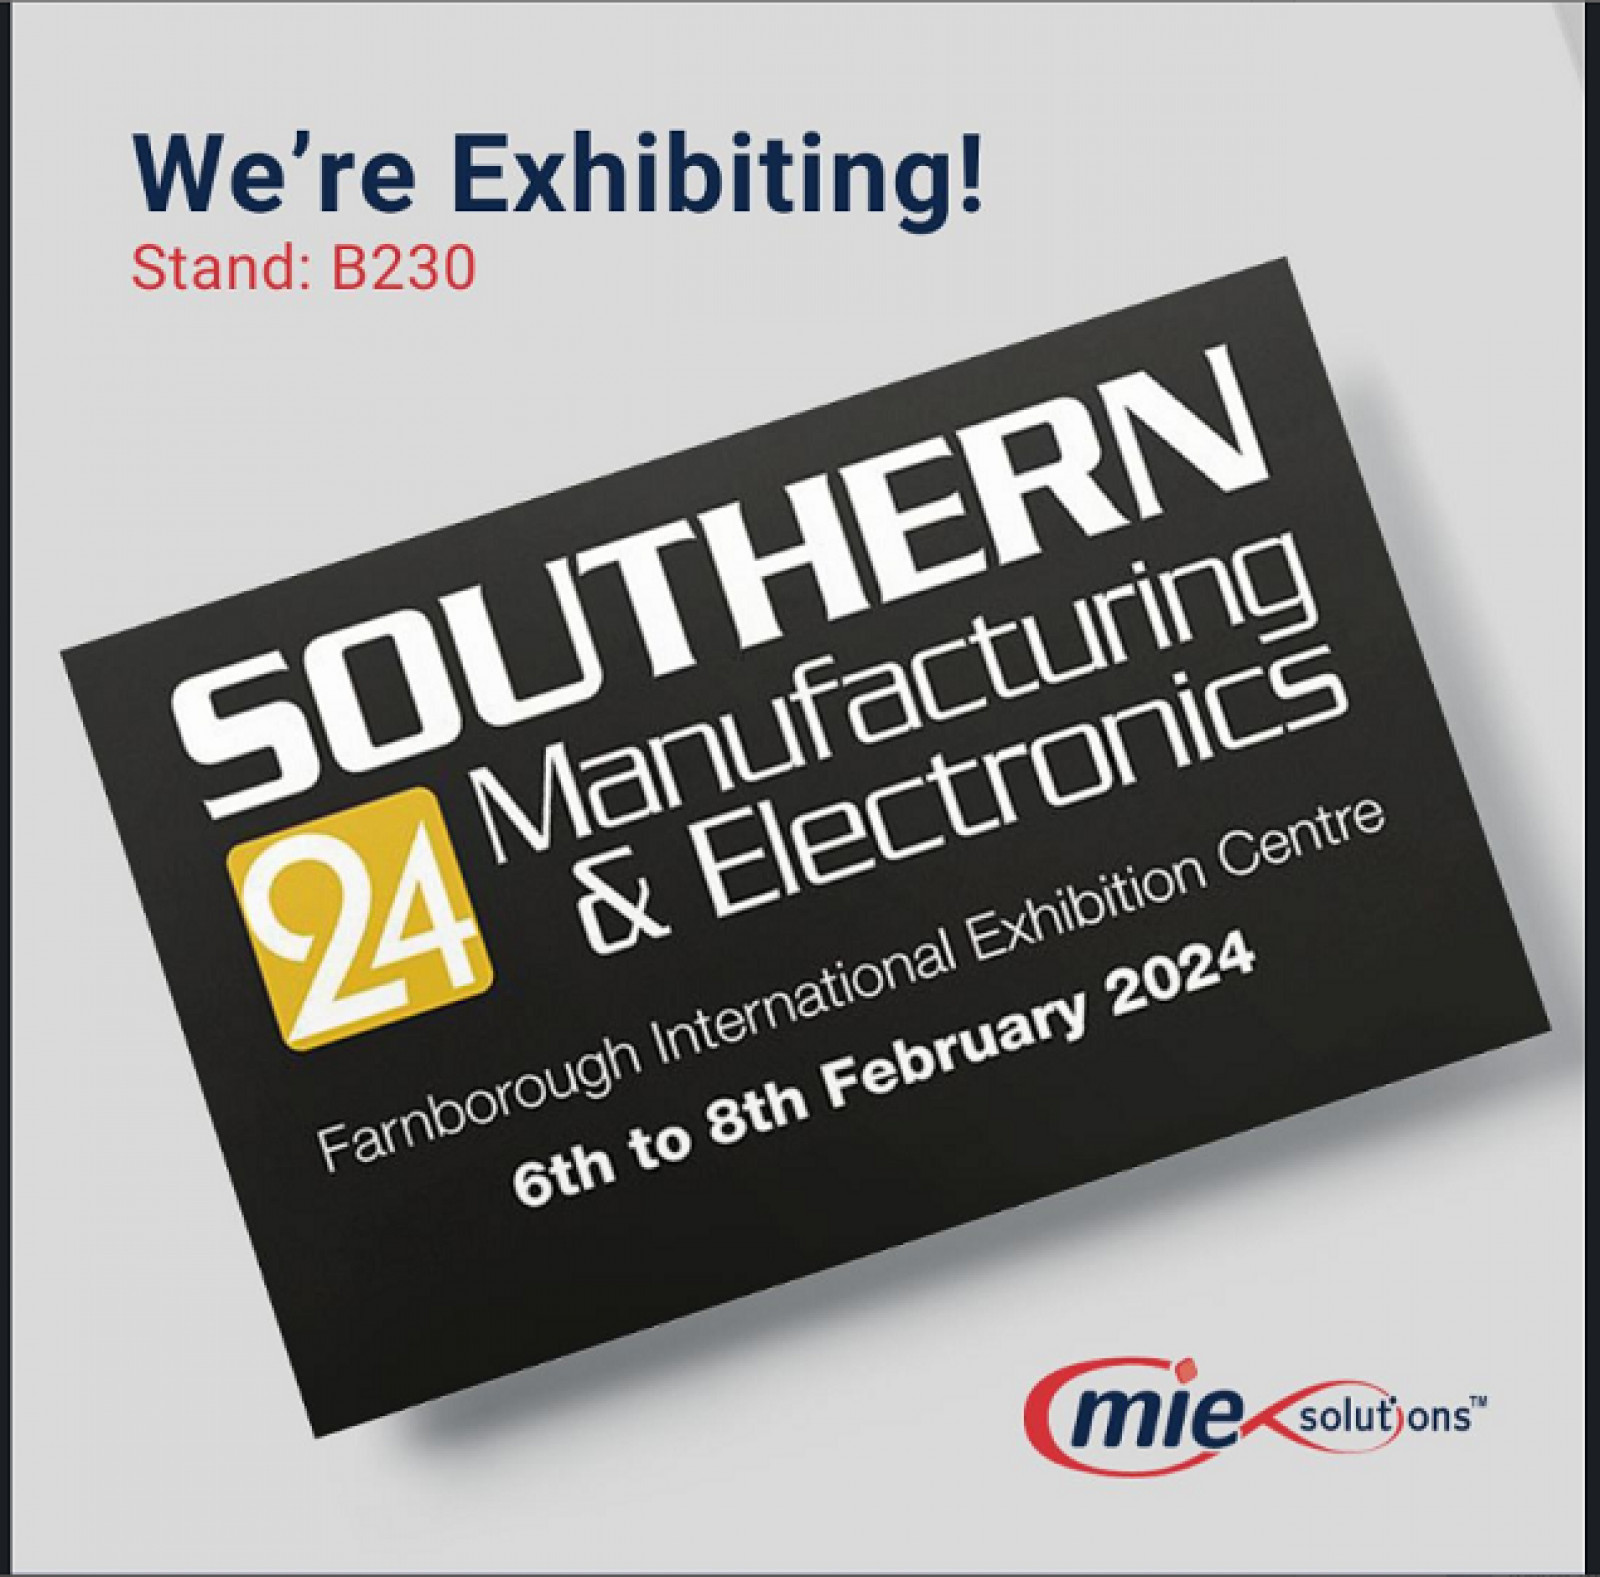 We're Exhibiting! Stand B230